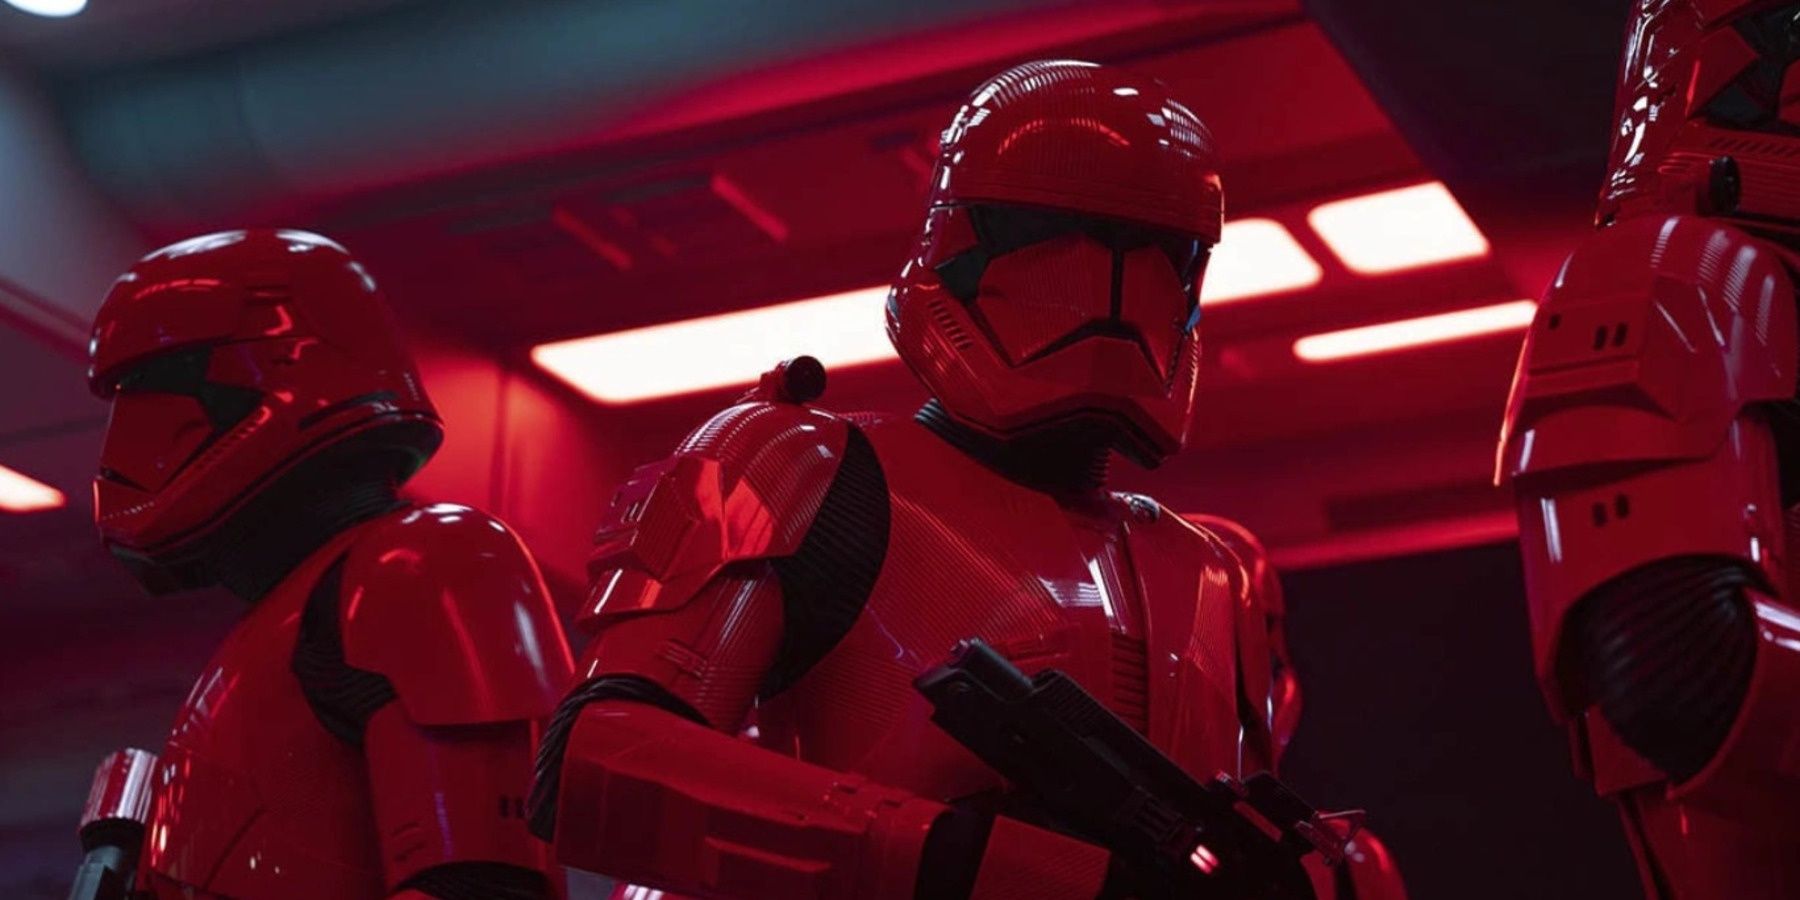 Sith Troopers, Stormtroopers in red armor, stand at the ready